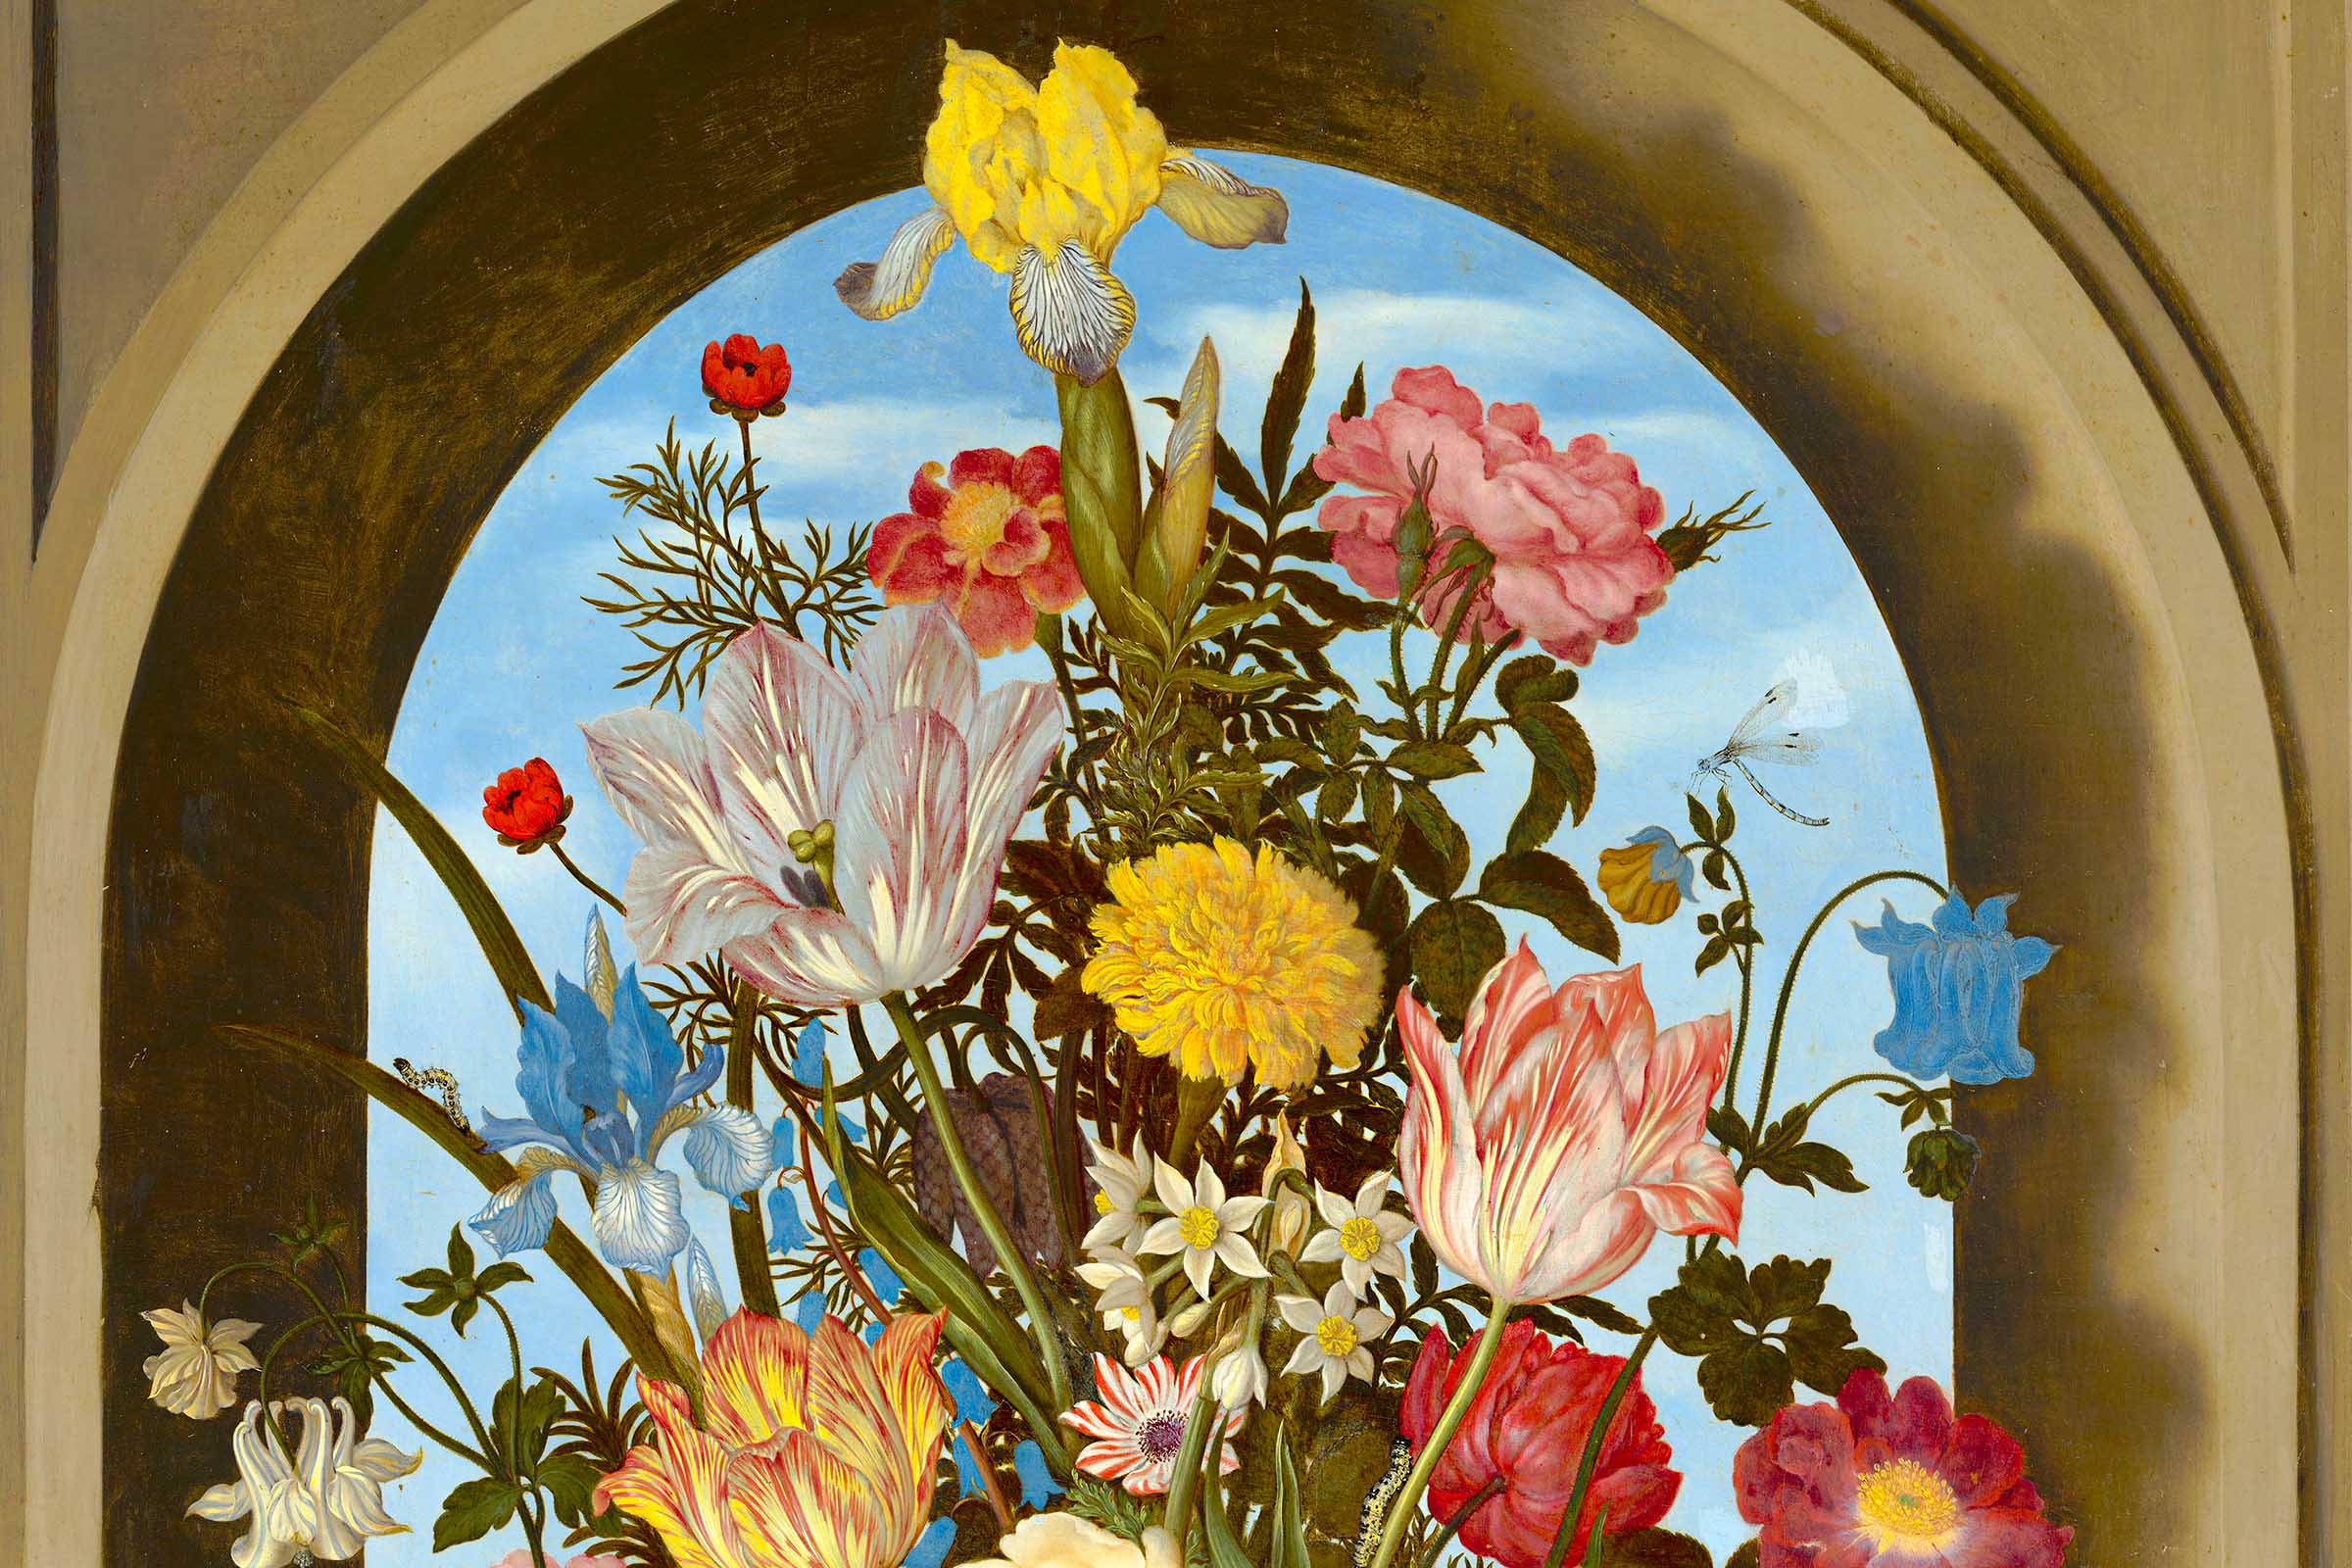 in-full-bloom-a-unique-floral-exposition-of-dutch-masters-from-the-17th-century-featured